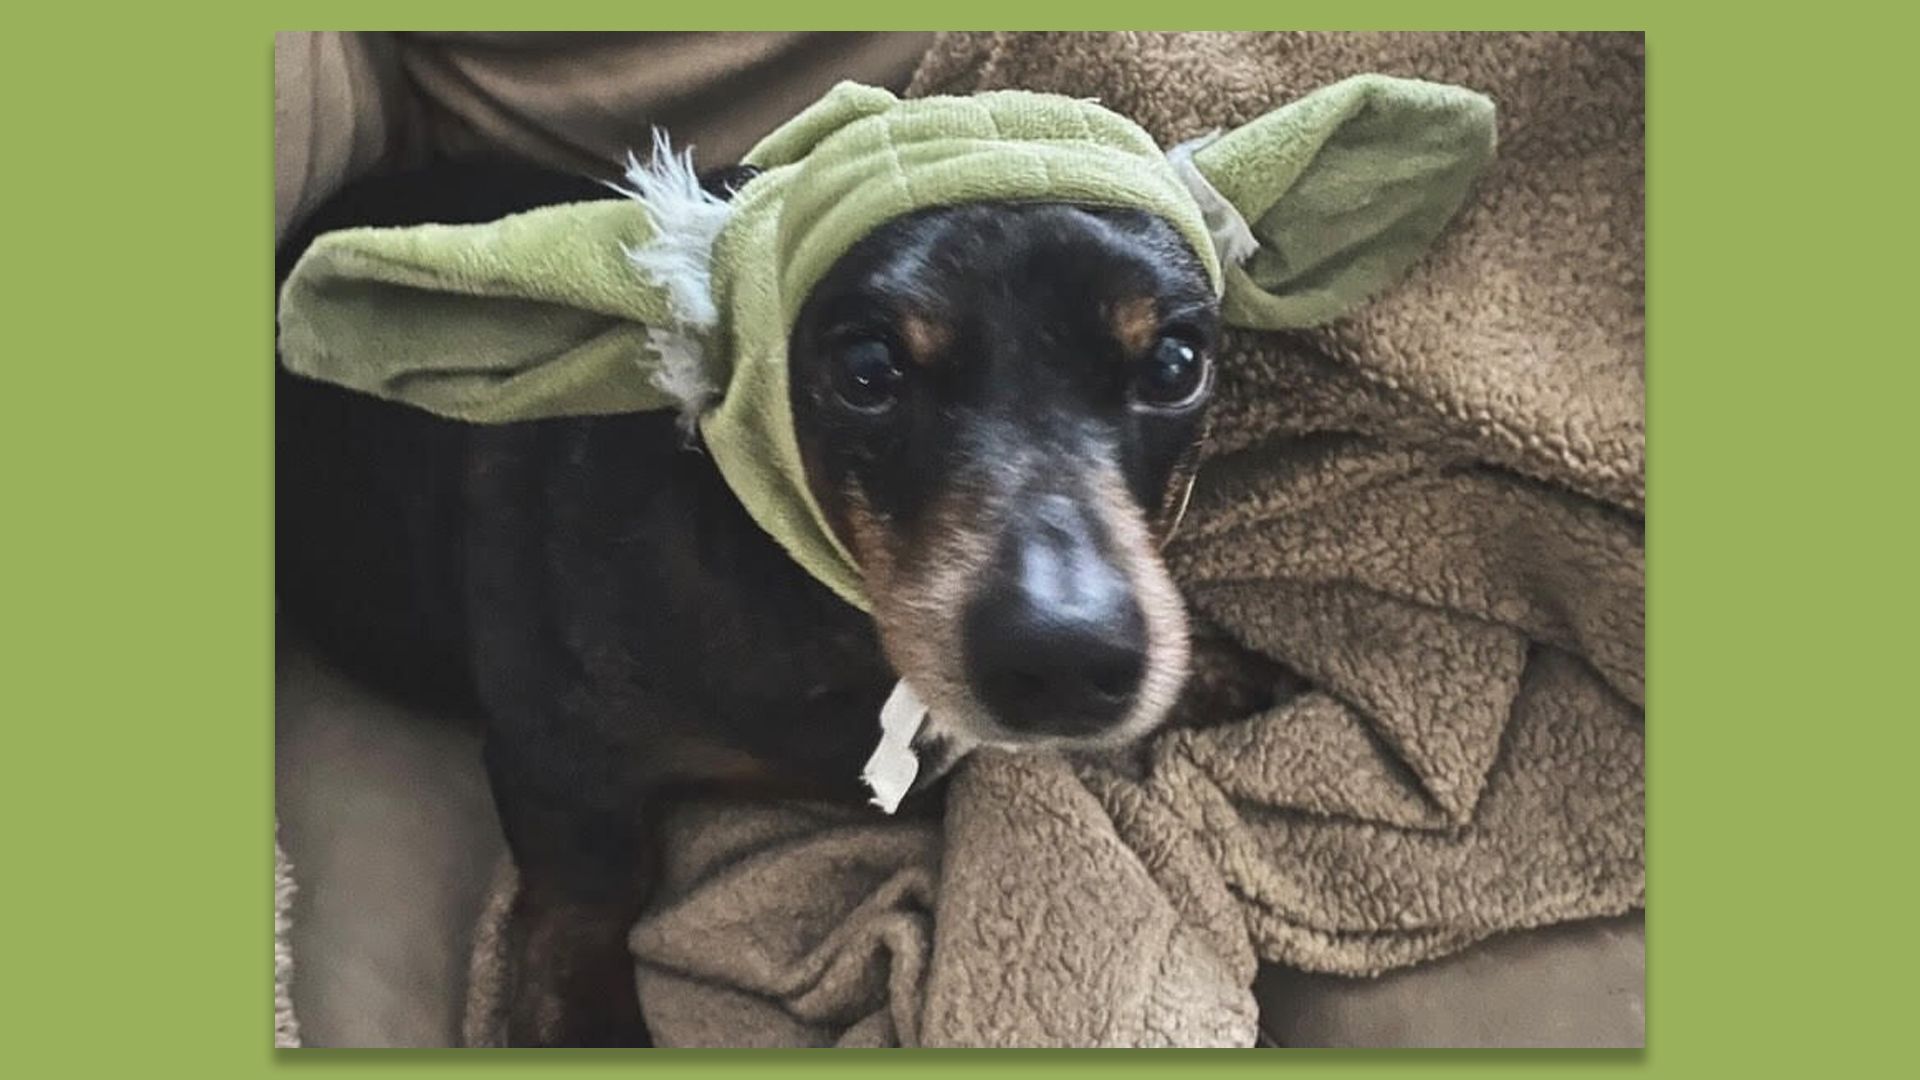 A photo of a dog in a Yoda costume.